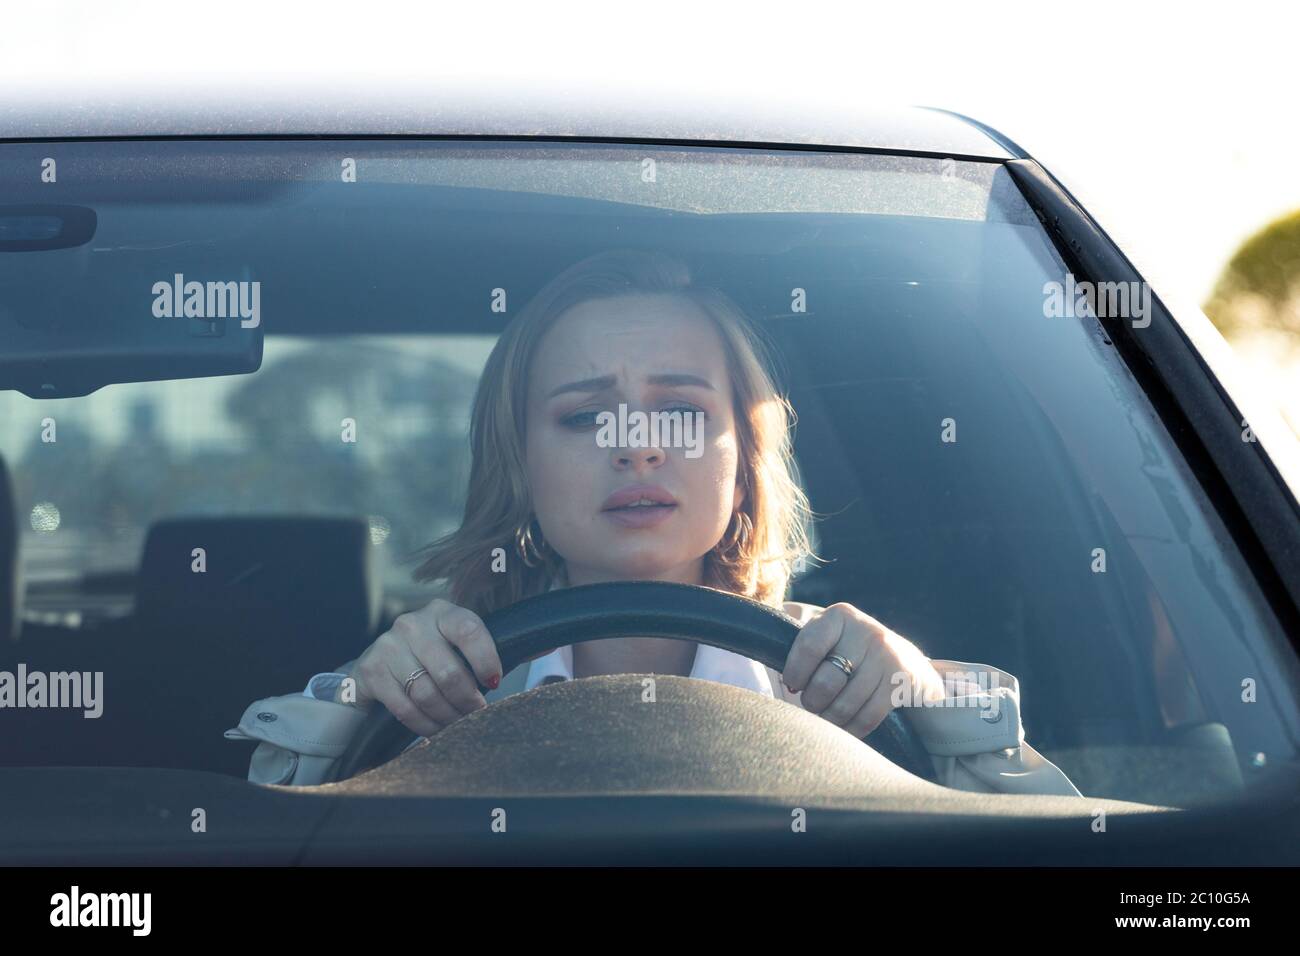 Woman drives her car for the first time, tries to avoid a car accident, is very nervous and scared, worries, clings tightly to the wheel. Stock Photo